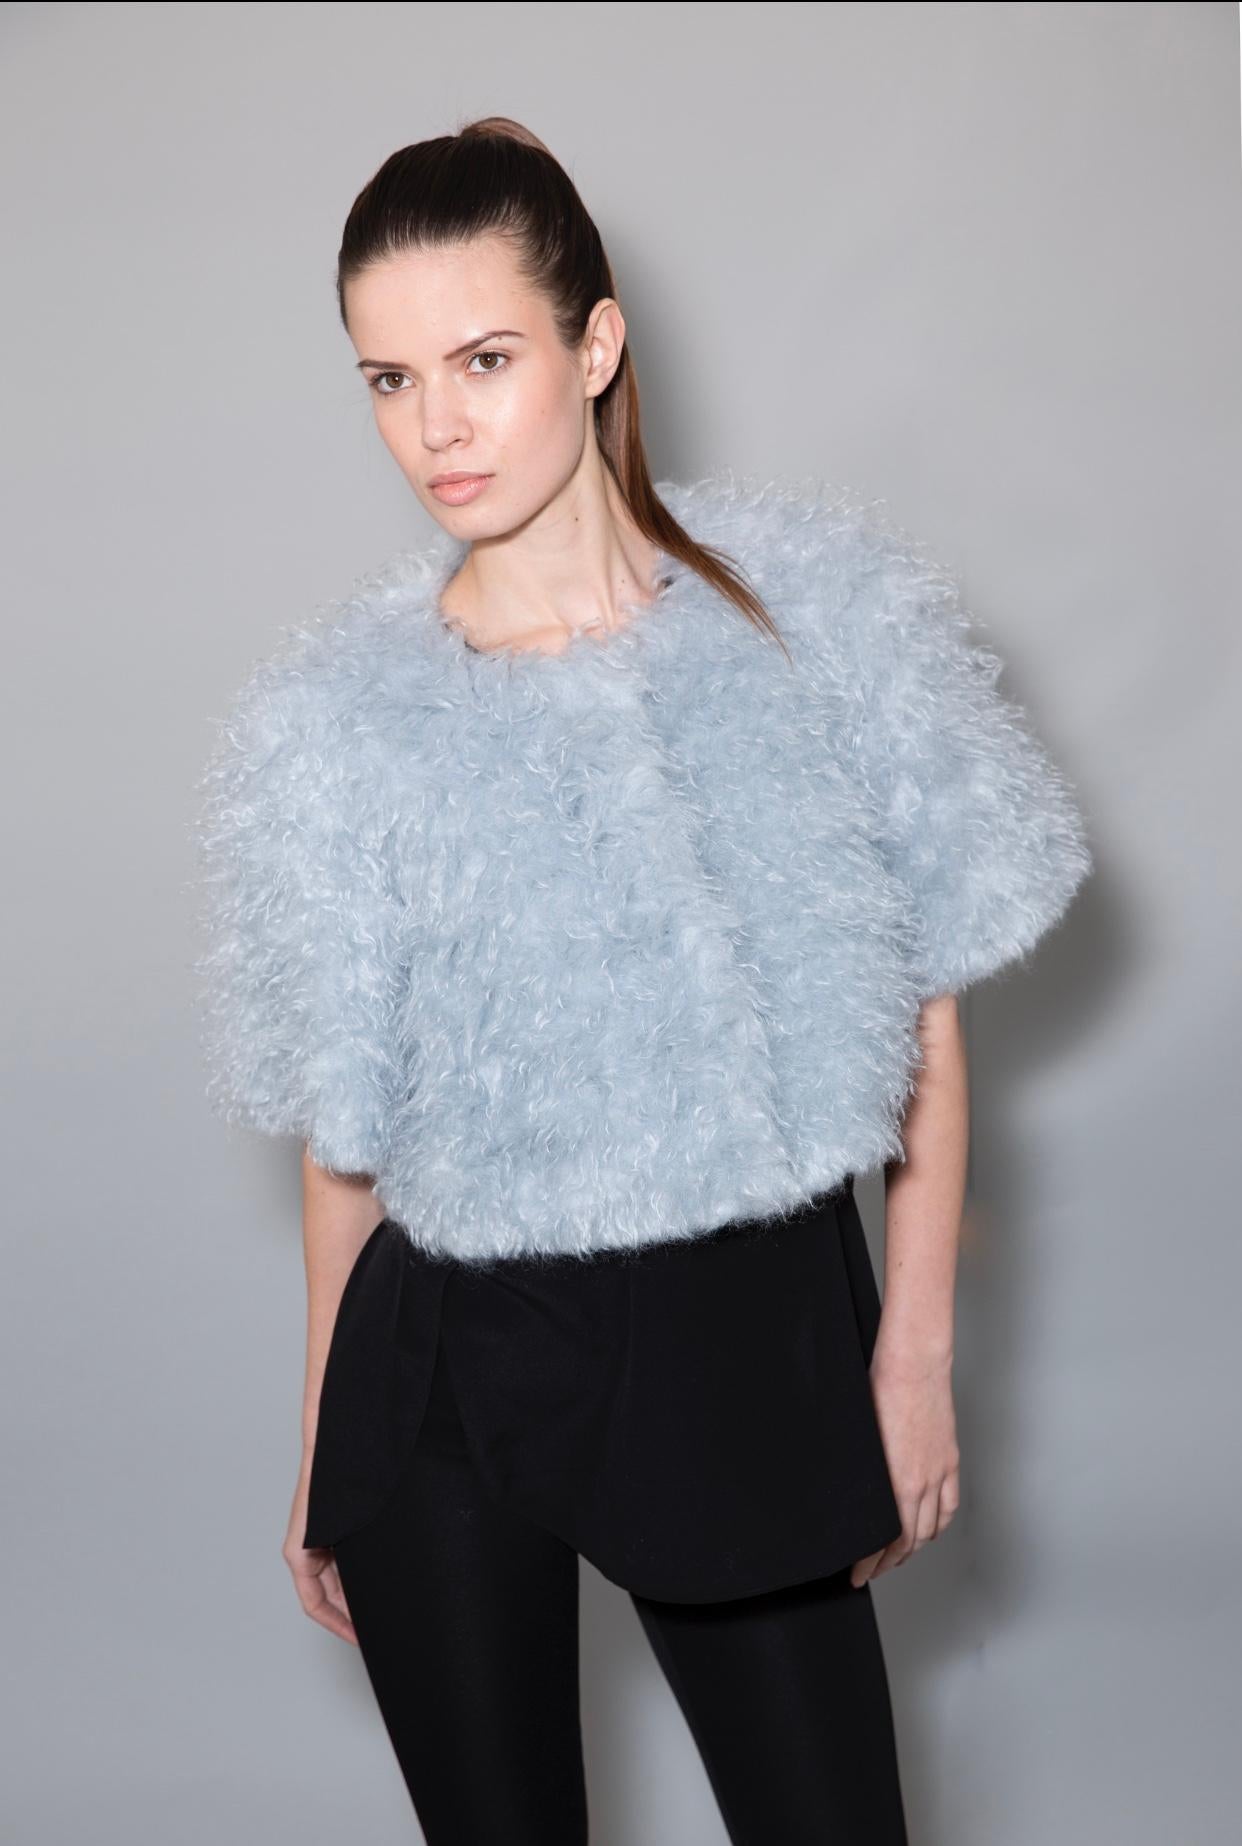 The Olivia Pelush powder blue mohair jacket is an exclusive piece. Featuring the highest quality mohair in the world made by an historic mill in Europe, this etherial shaggy cropped jacket is perfect for the coldest months of the year. Timeless,